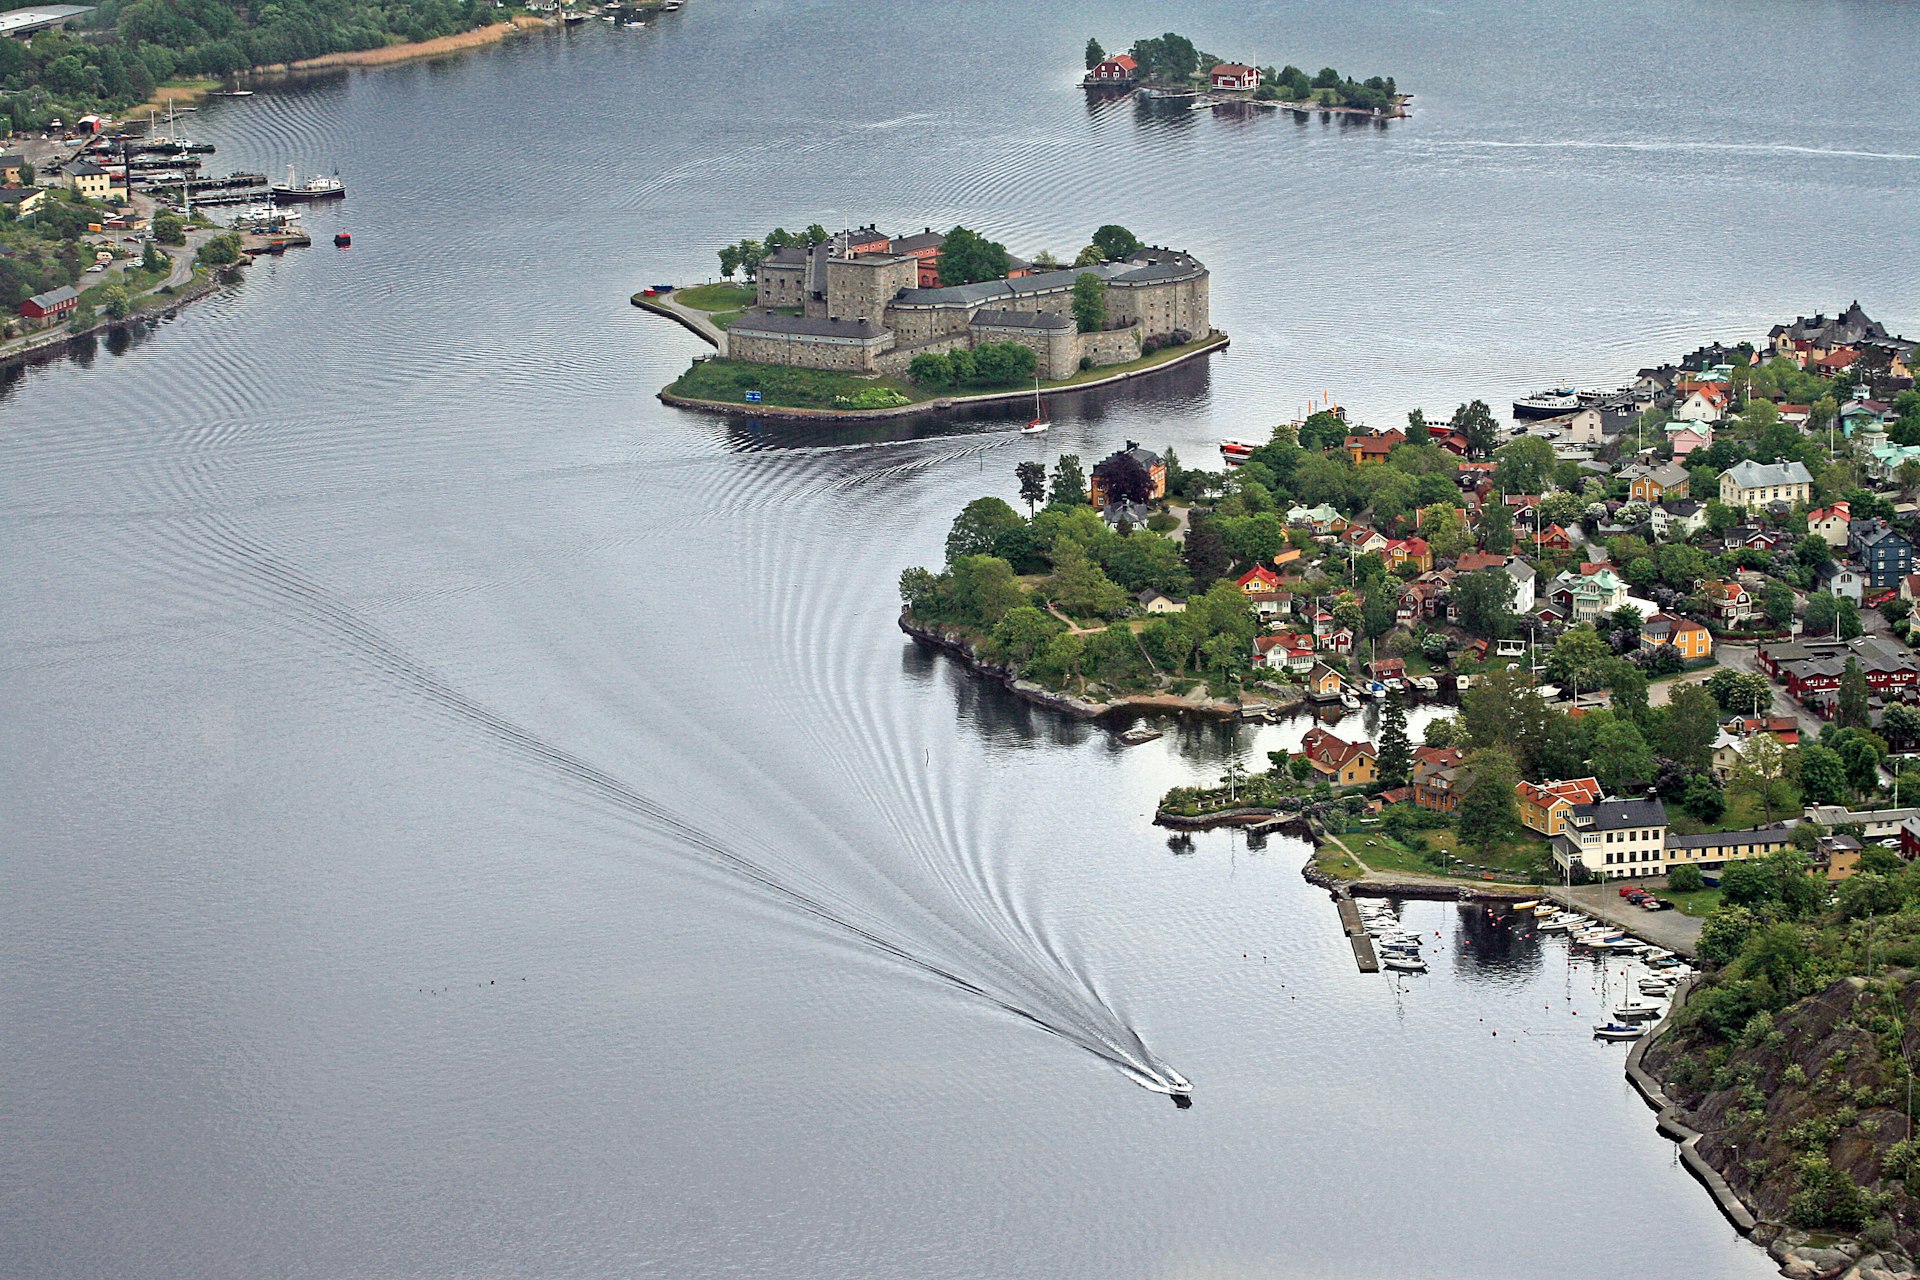 An aerial shot of a series of built-up islands in a body of water